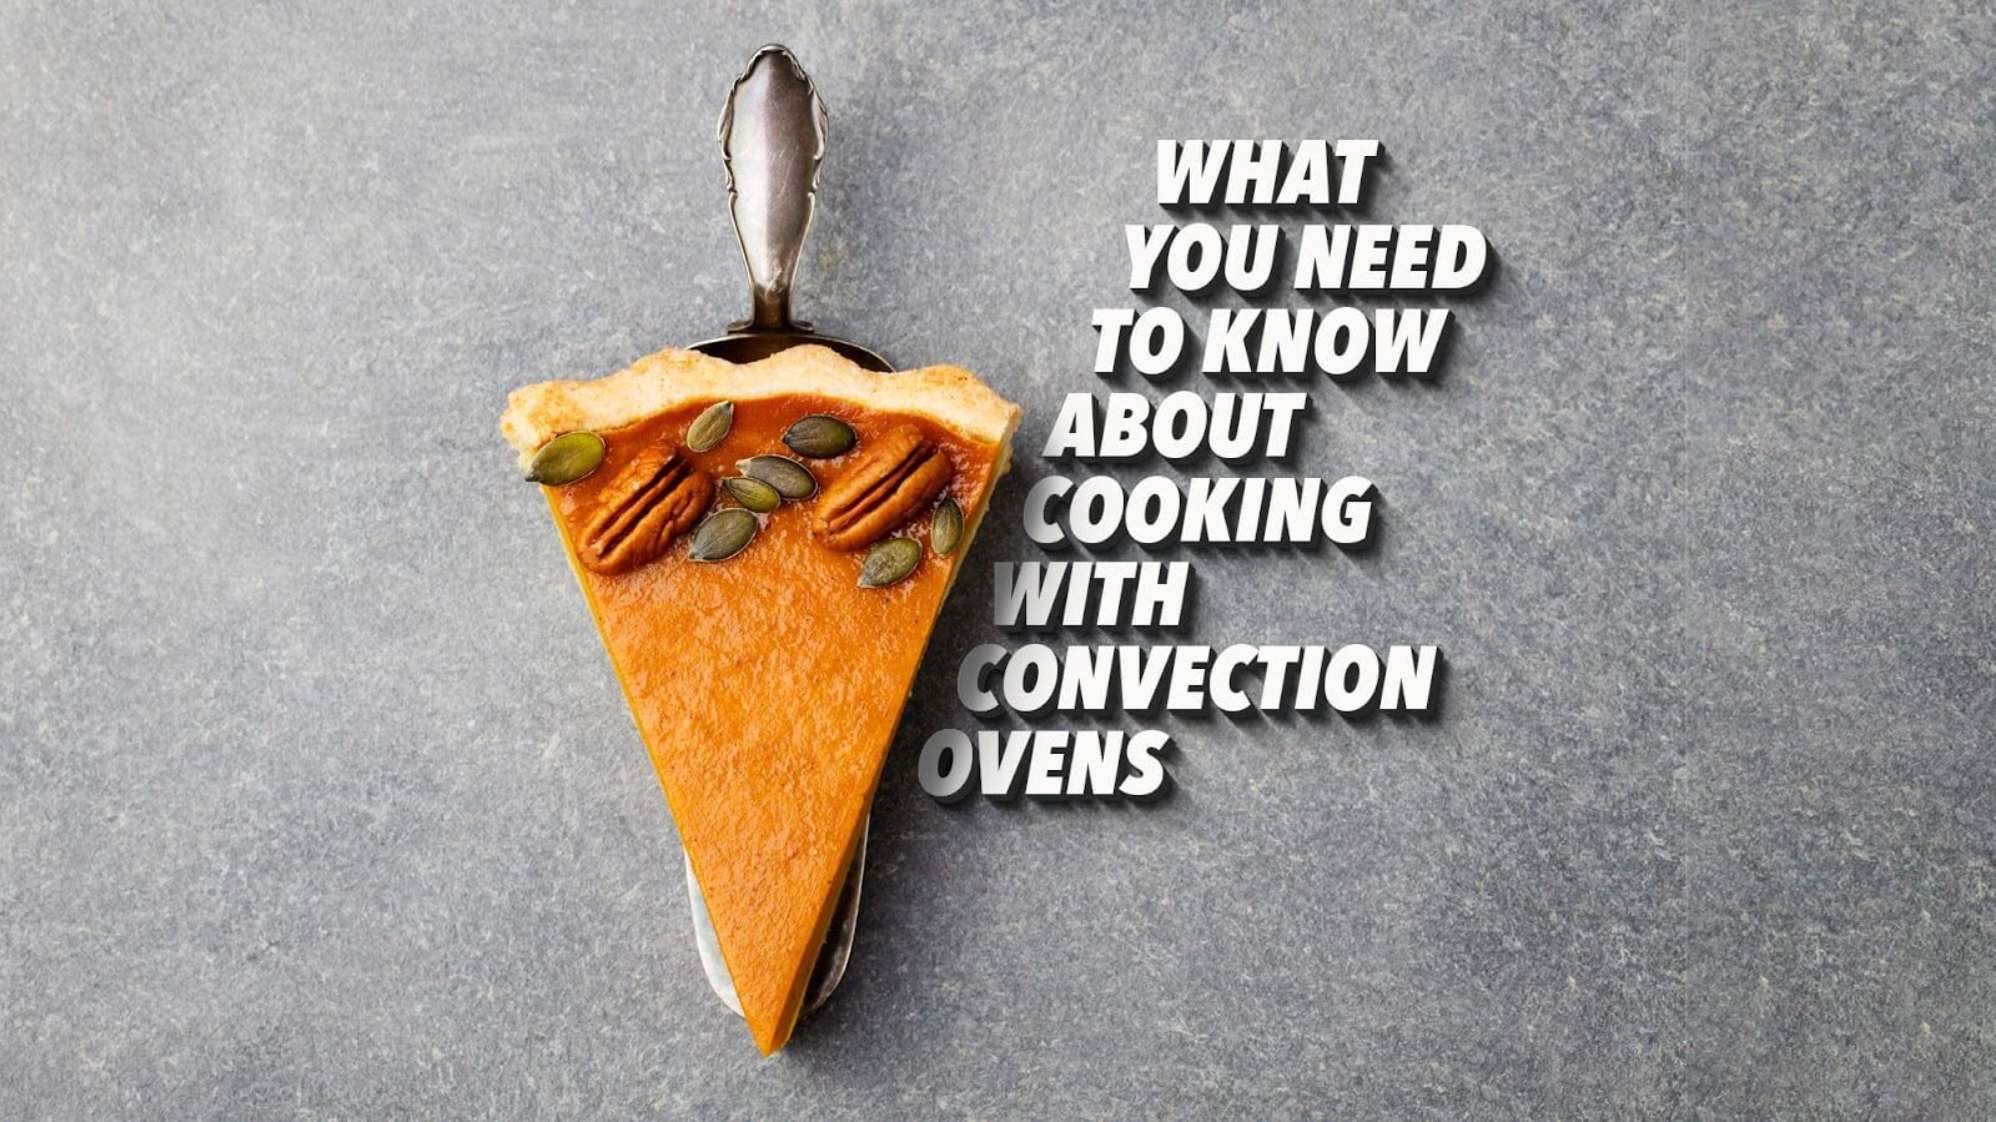 What You Need to Know About Cooking With Convection Ovens